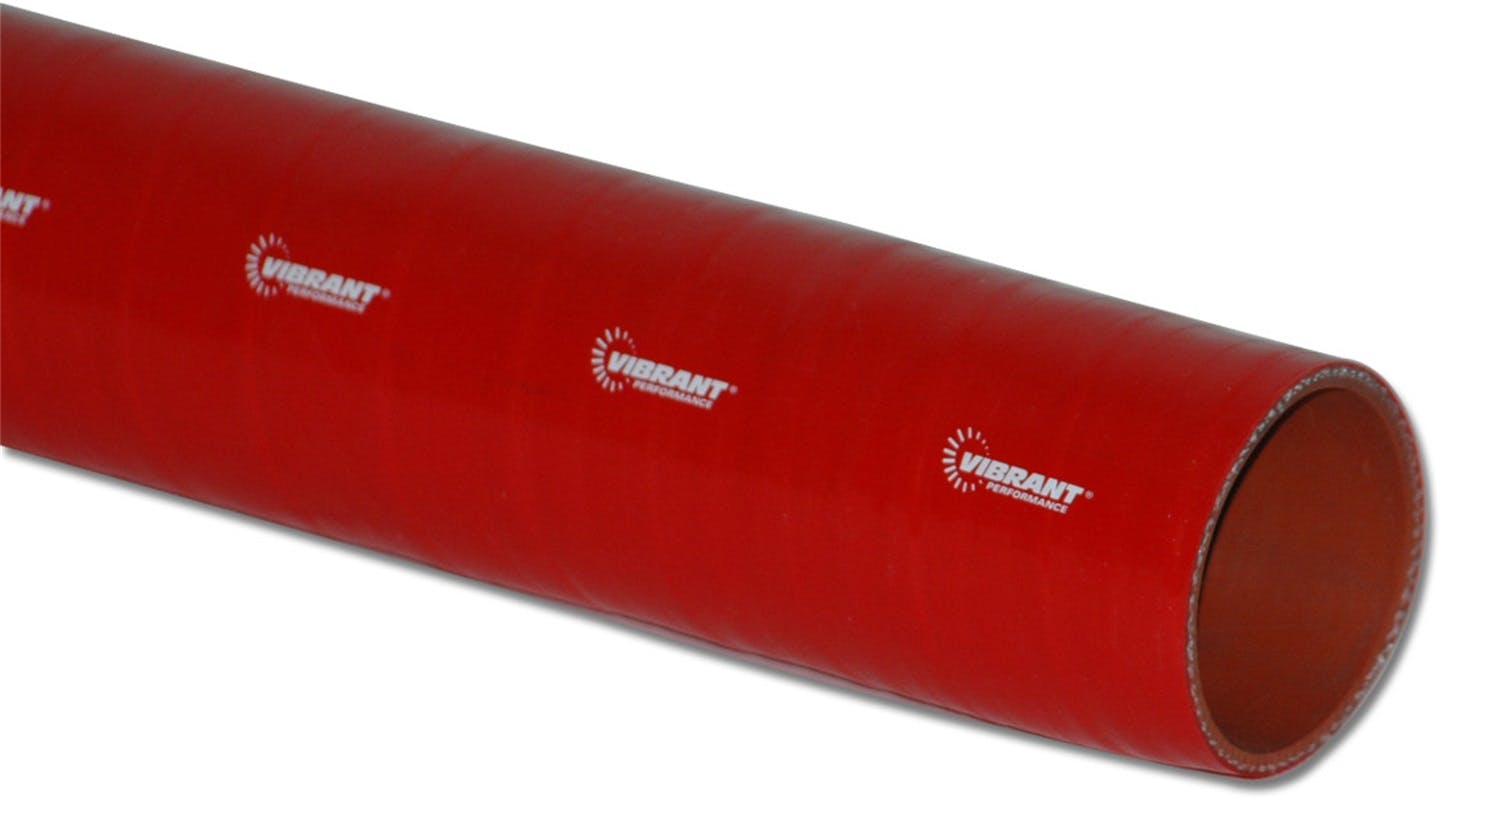 Vibrant Performance 27091R 4 Ply Silicone Sleeve, 2.25 inch I.D. x 12 inch Long - Red